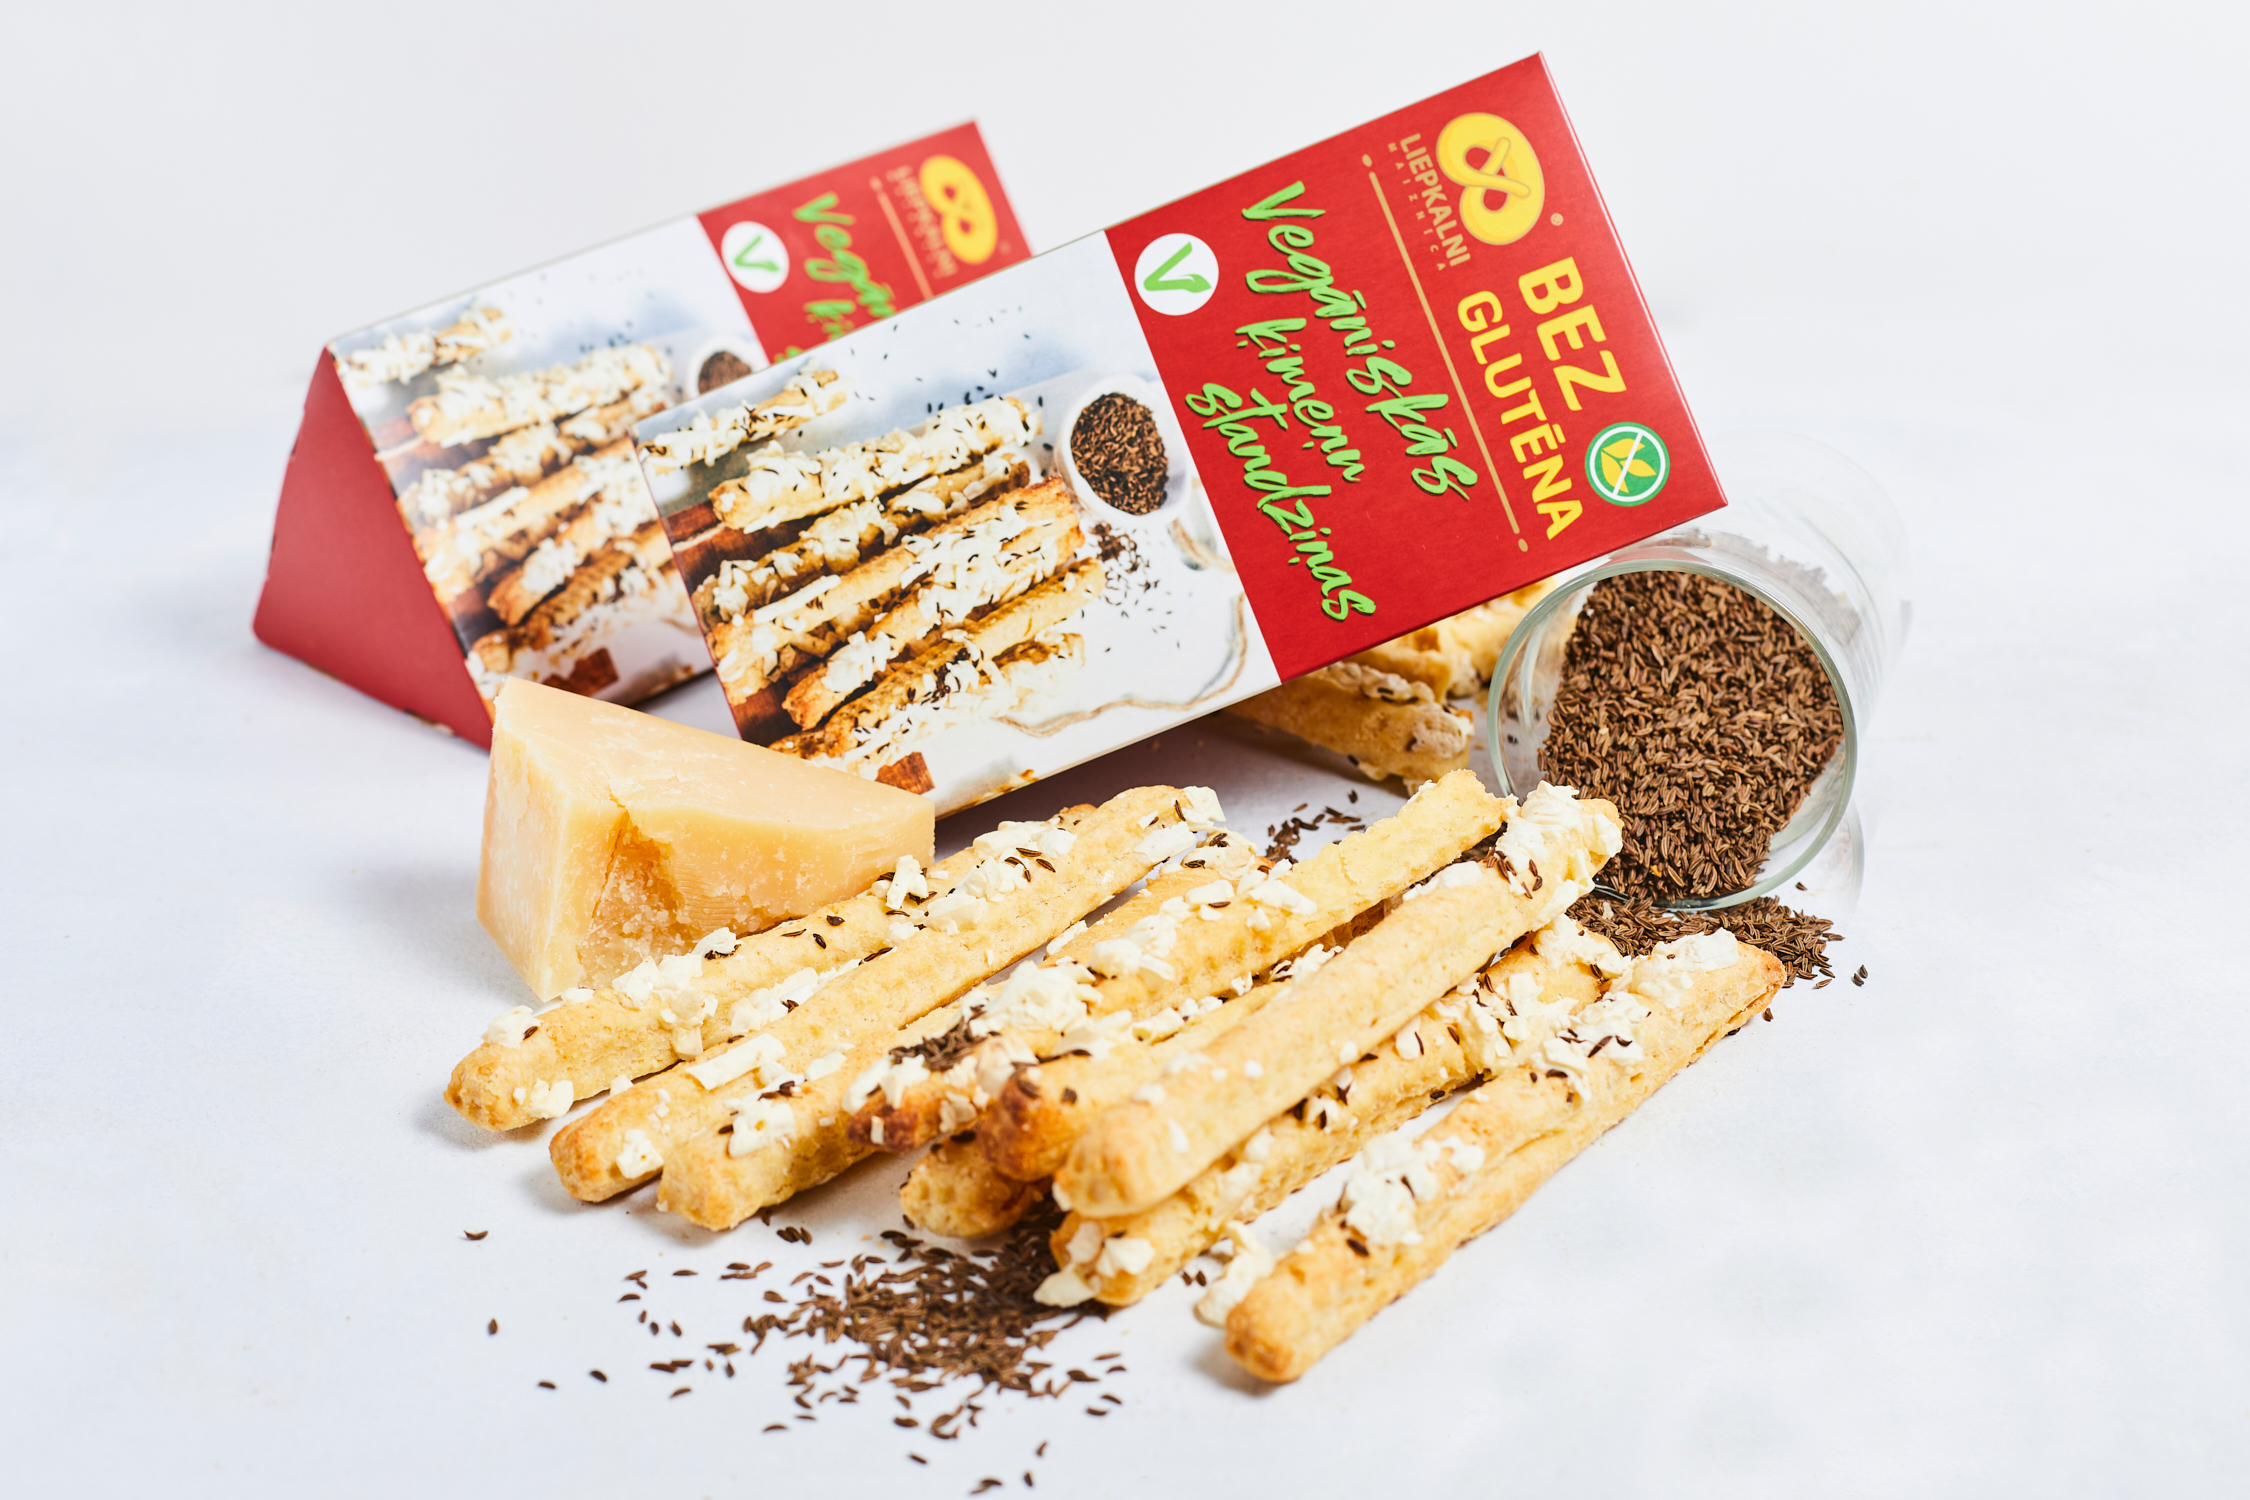 Vegan puff pastry sticks with cheese and caraway seeds